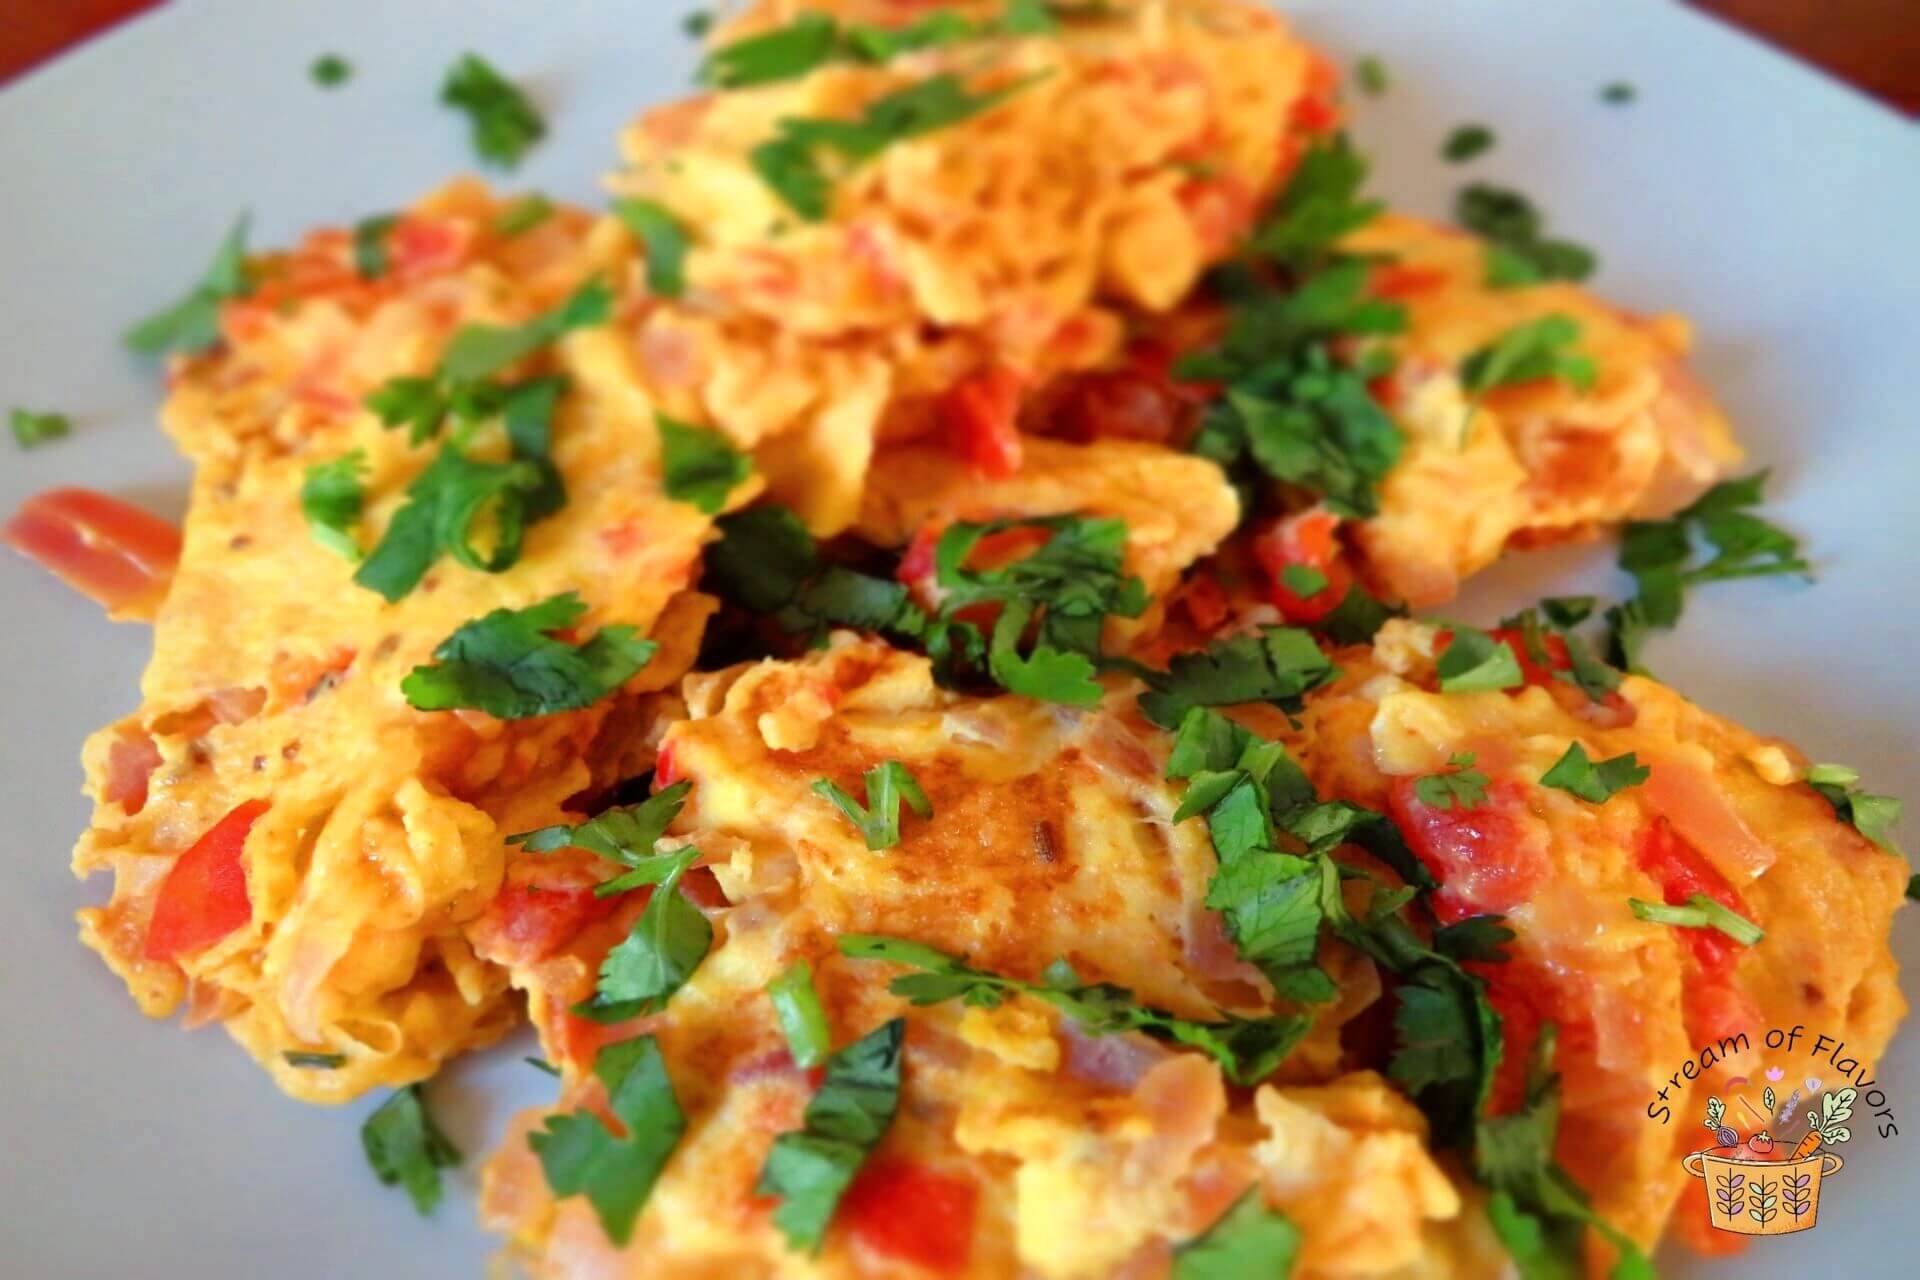 Spicy scrambled eggs on a plate